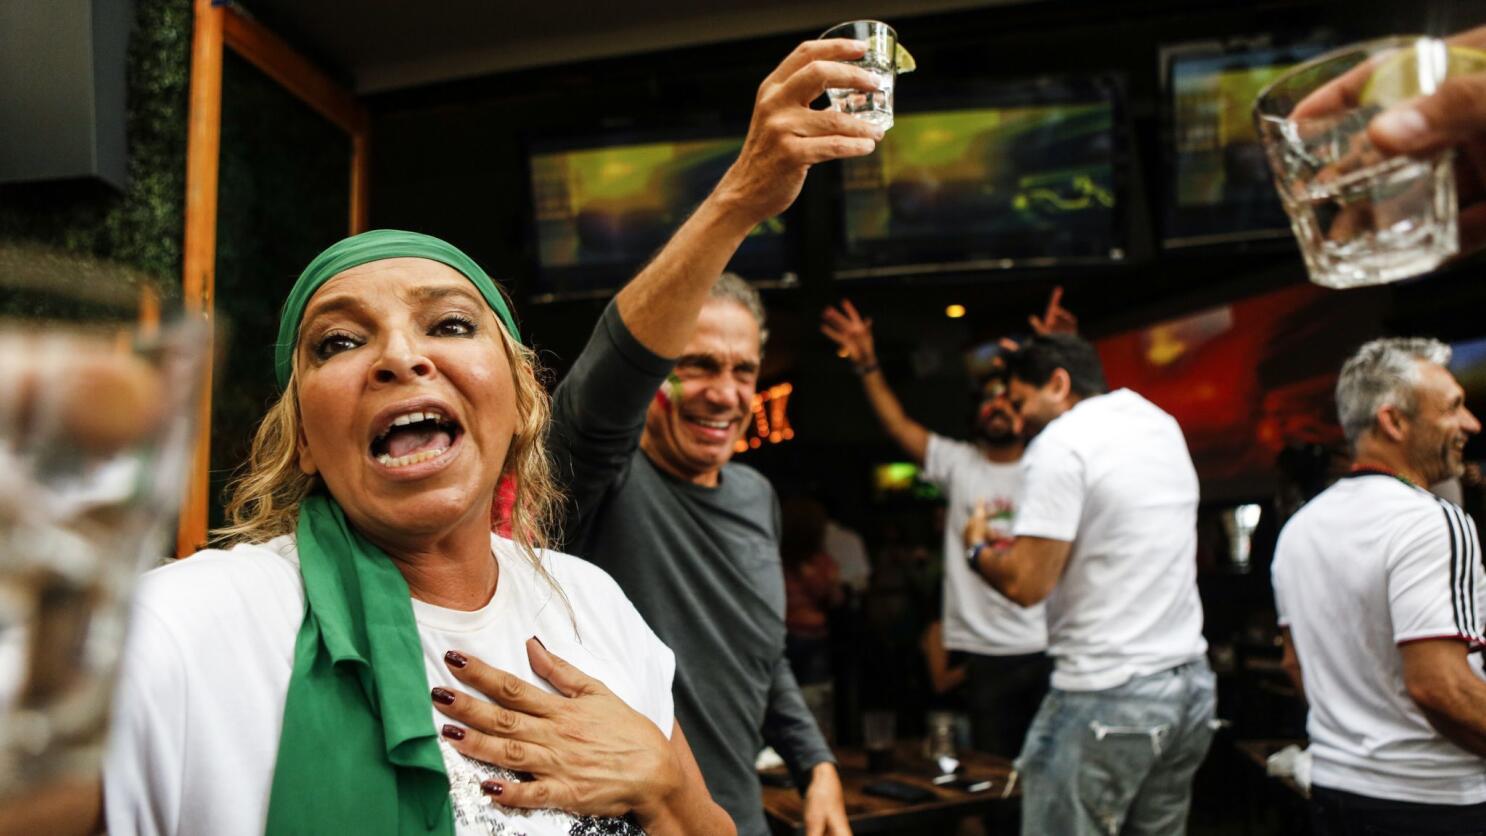 Iranians face retribution after World Cup loss against USA: experts